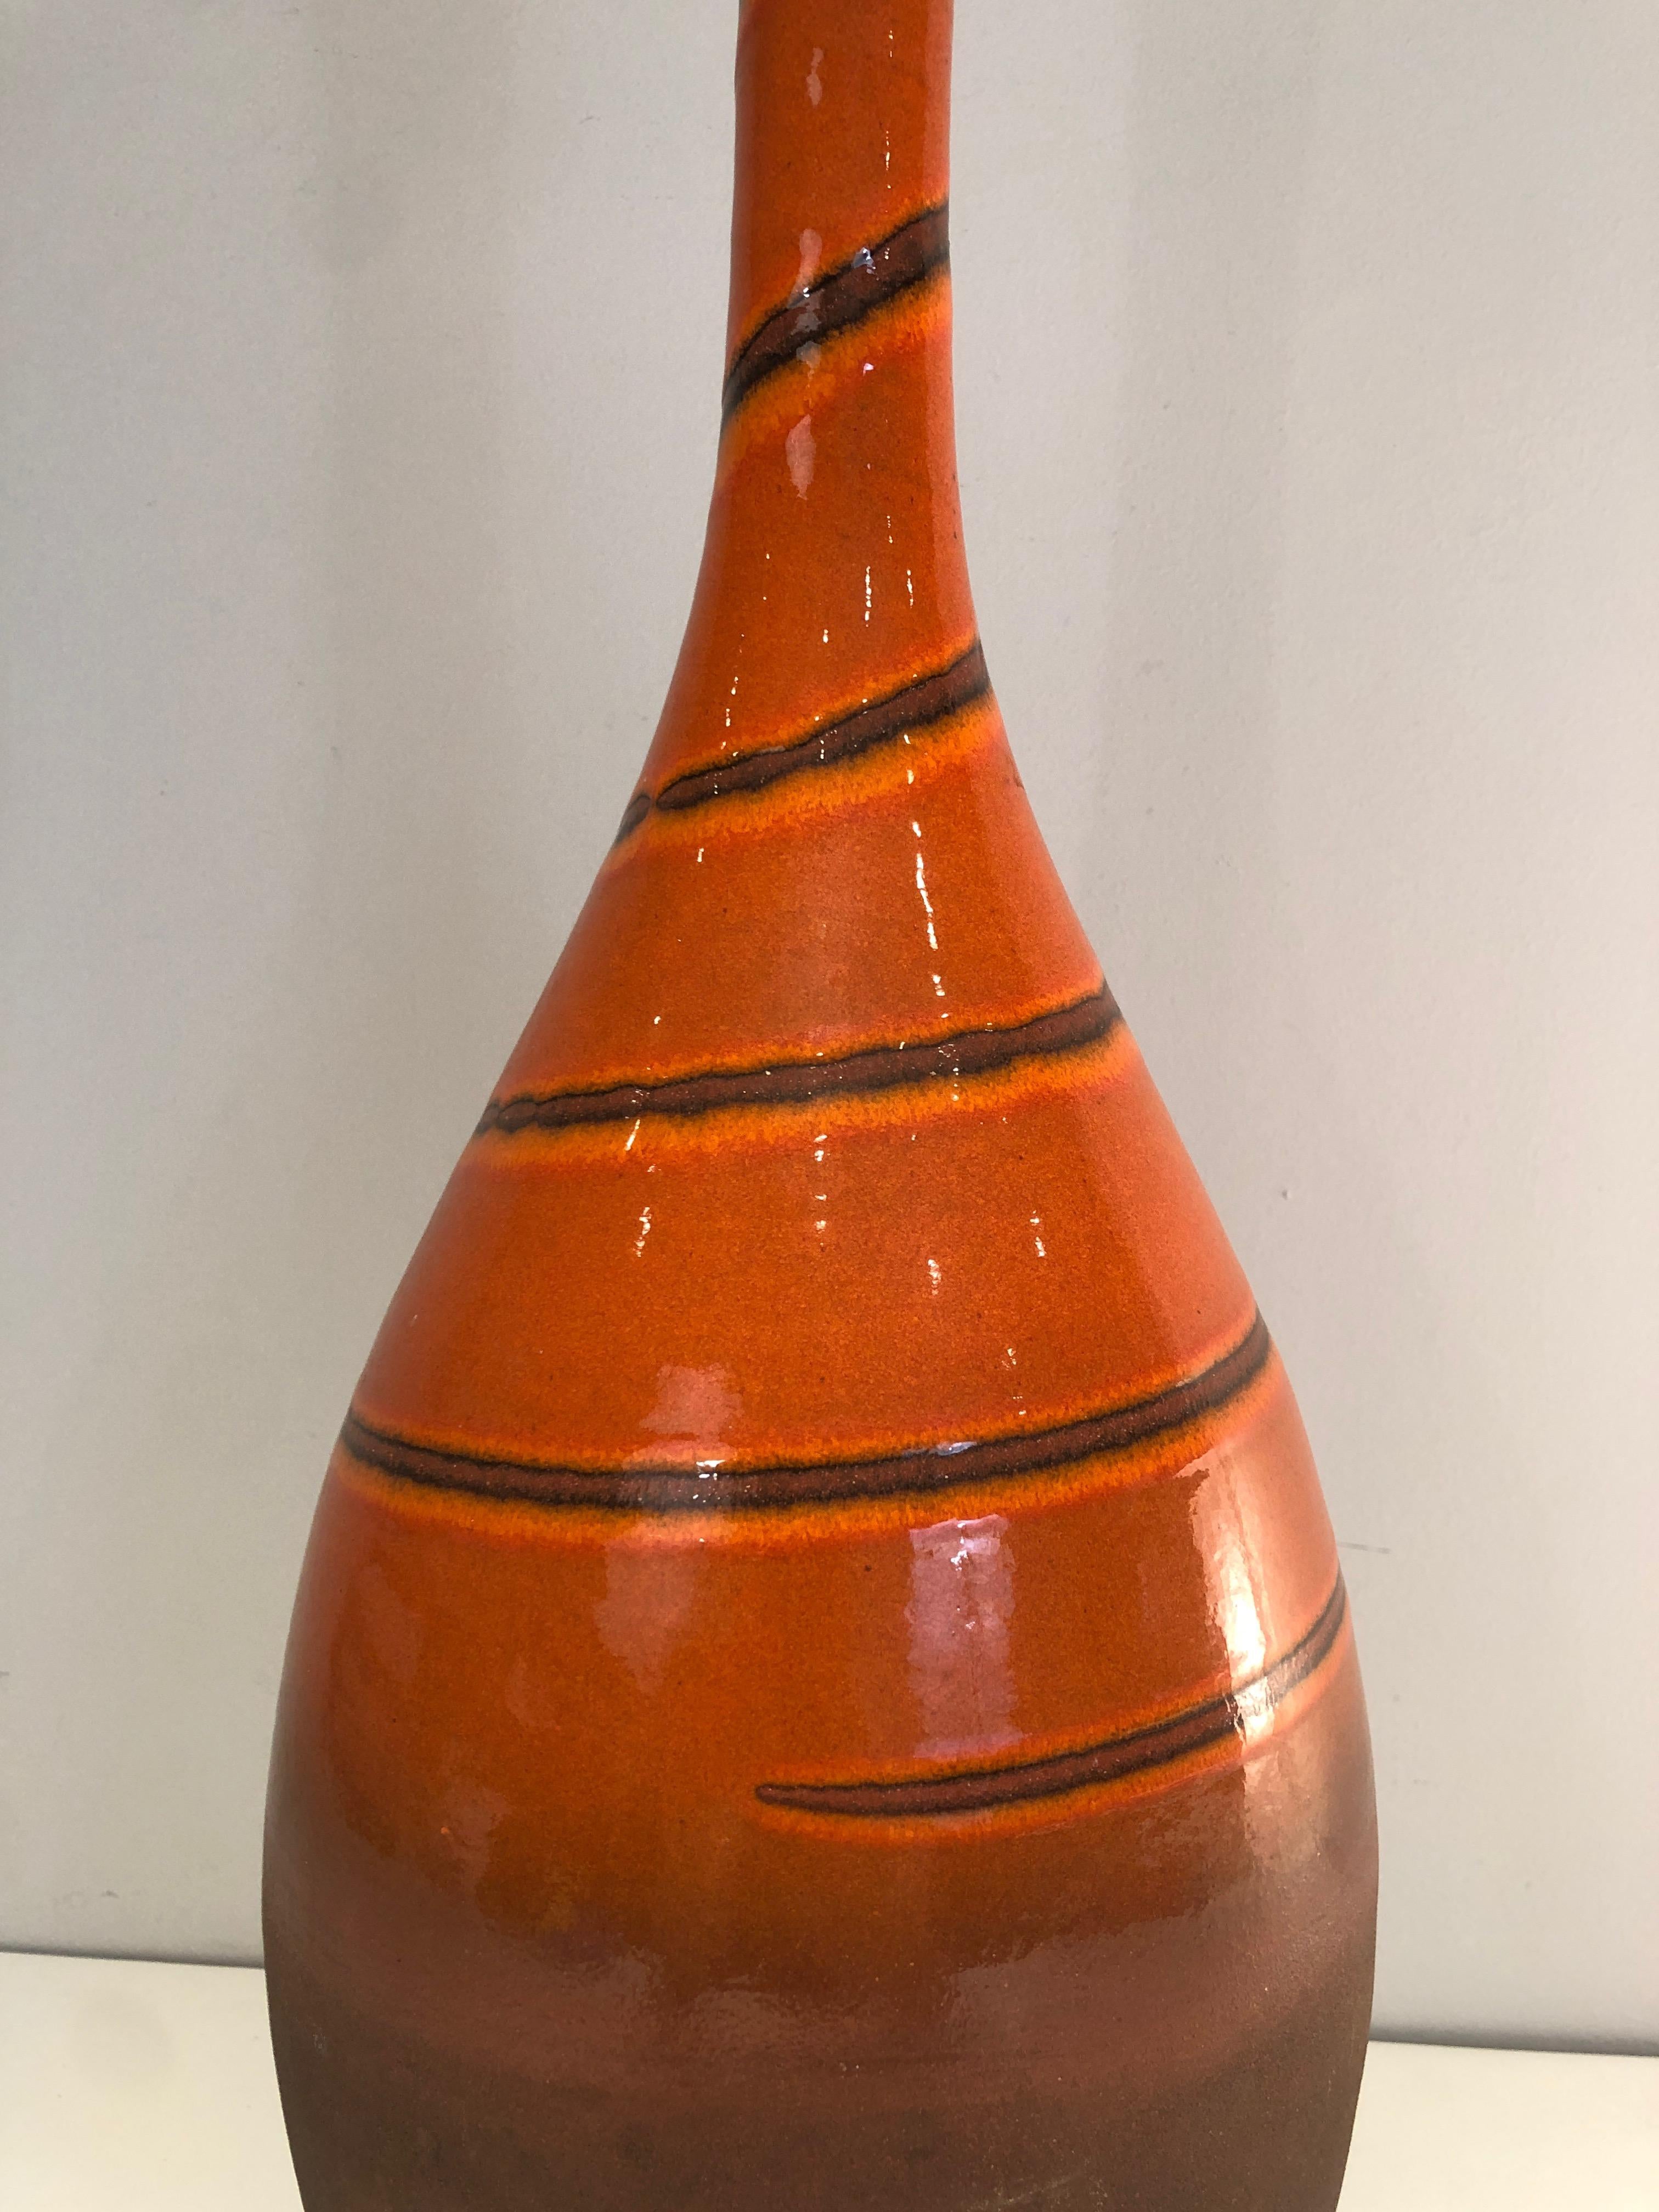 Tall Ceramic Vase in the Red-Orange Tones, French Work, Circa 1950 For Sale 1